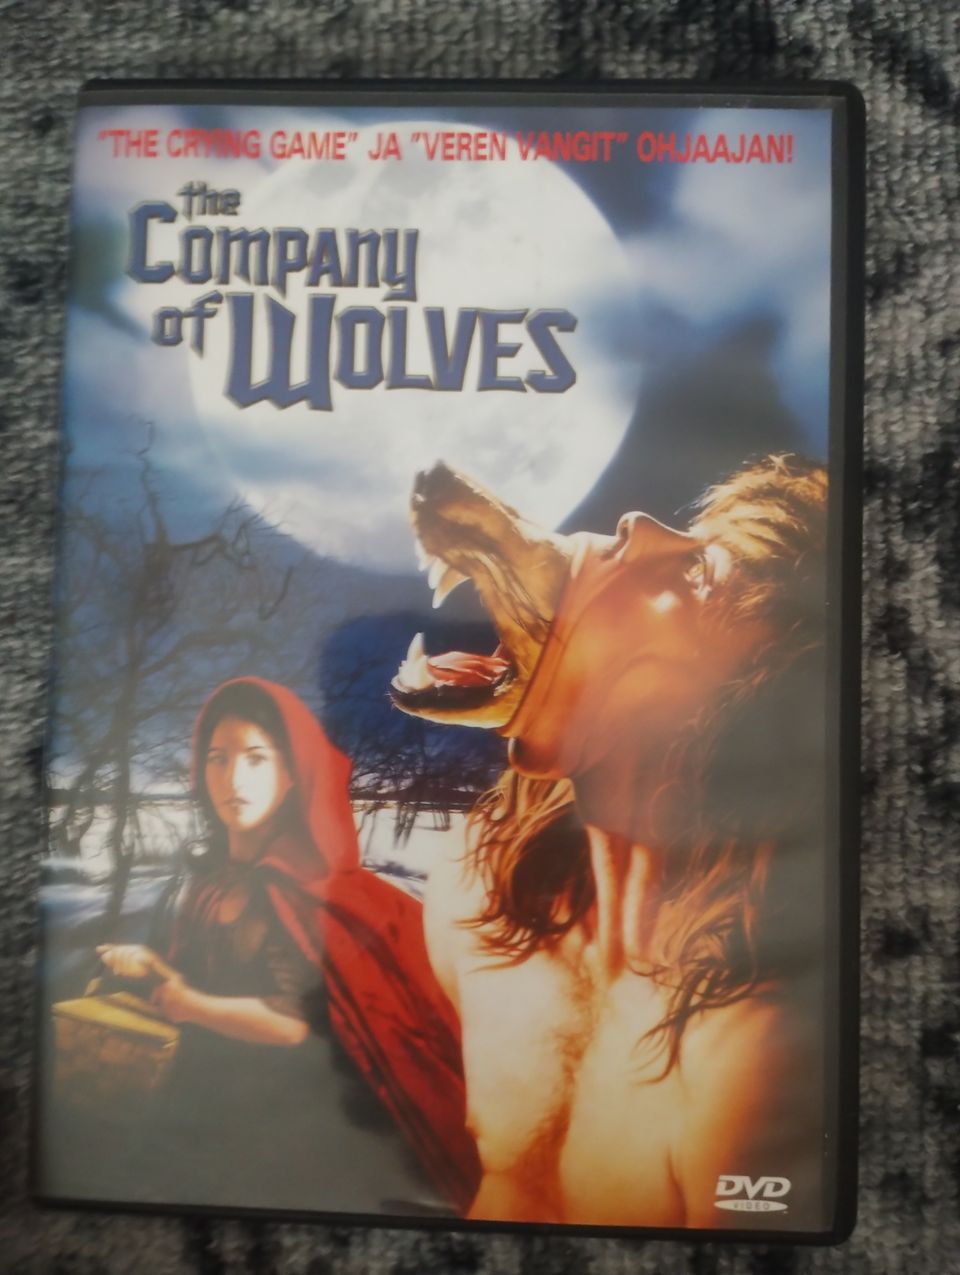 Company of The wolves